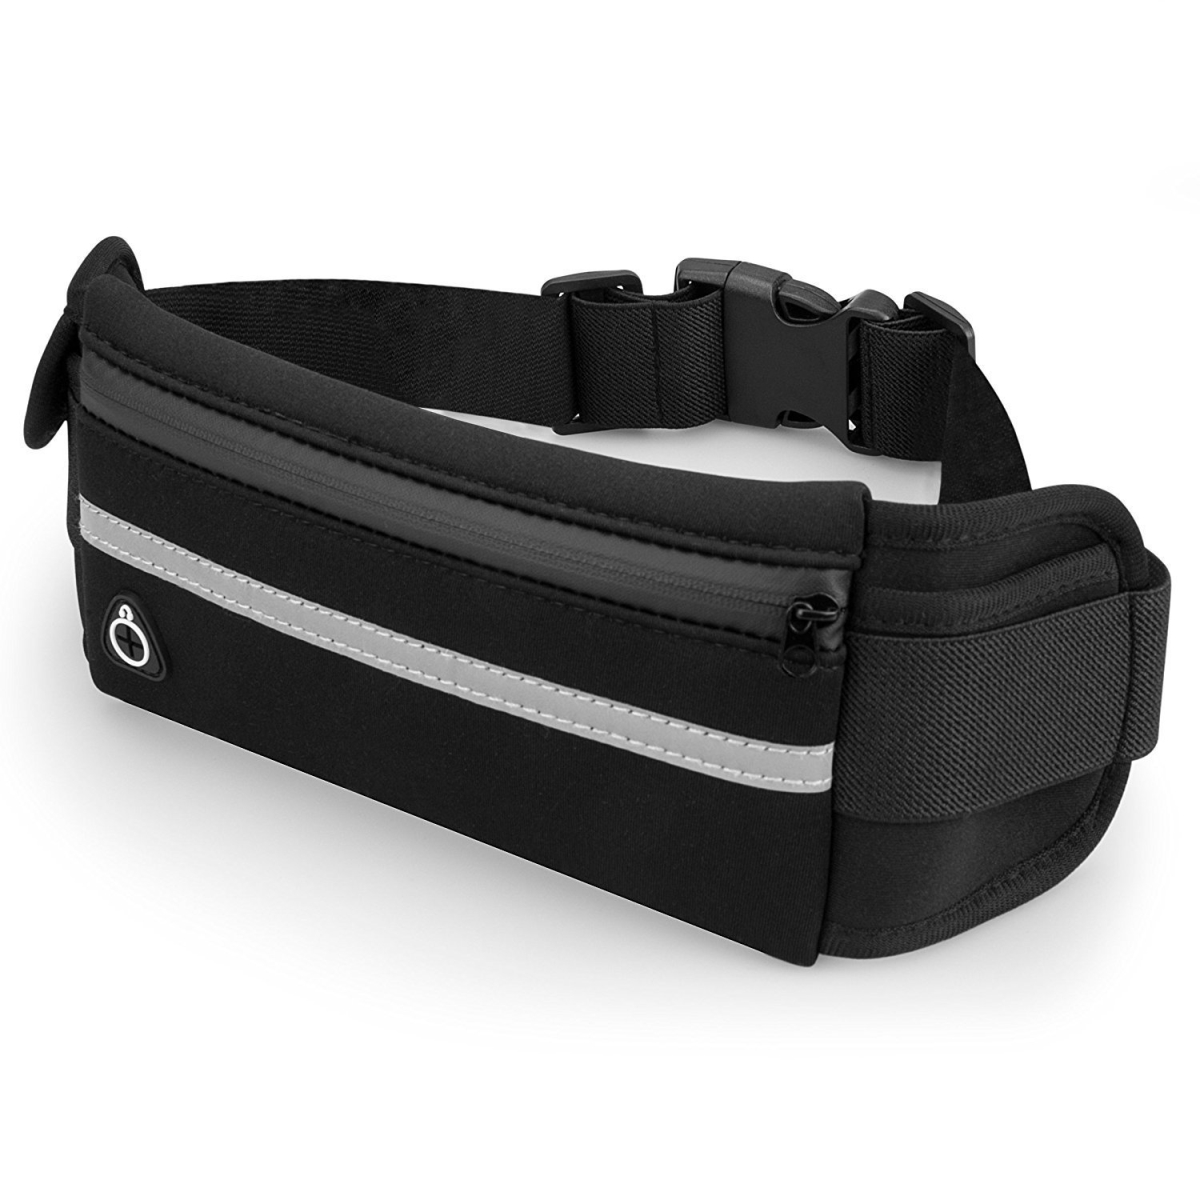 JG-RUNBELT2-BLACK Sports Running Belt & Travel Fanny Pack for Jogging, Cycling & Outdoors with Water Resistant Pockets, Black